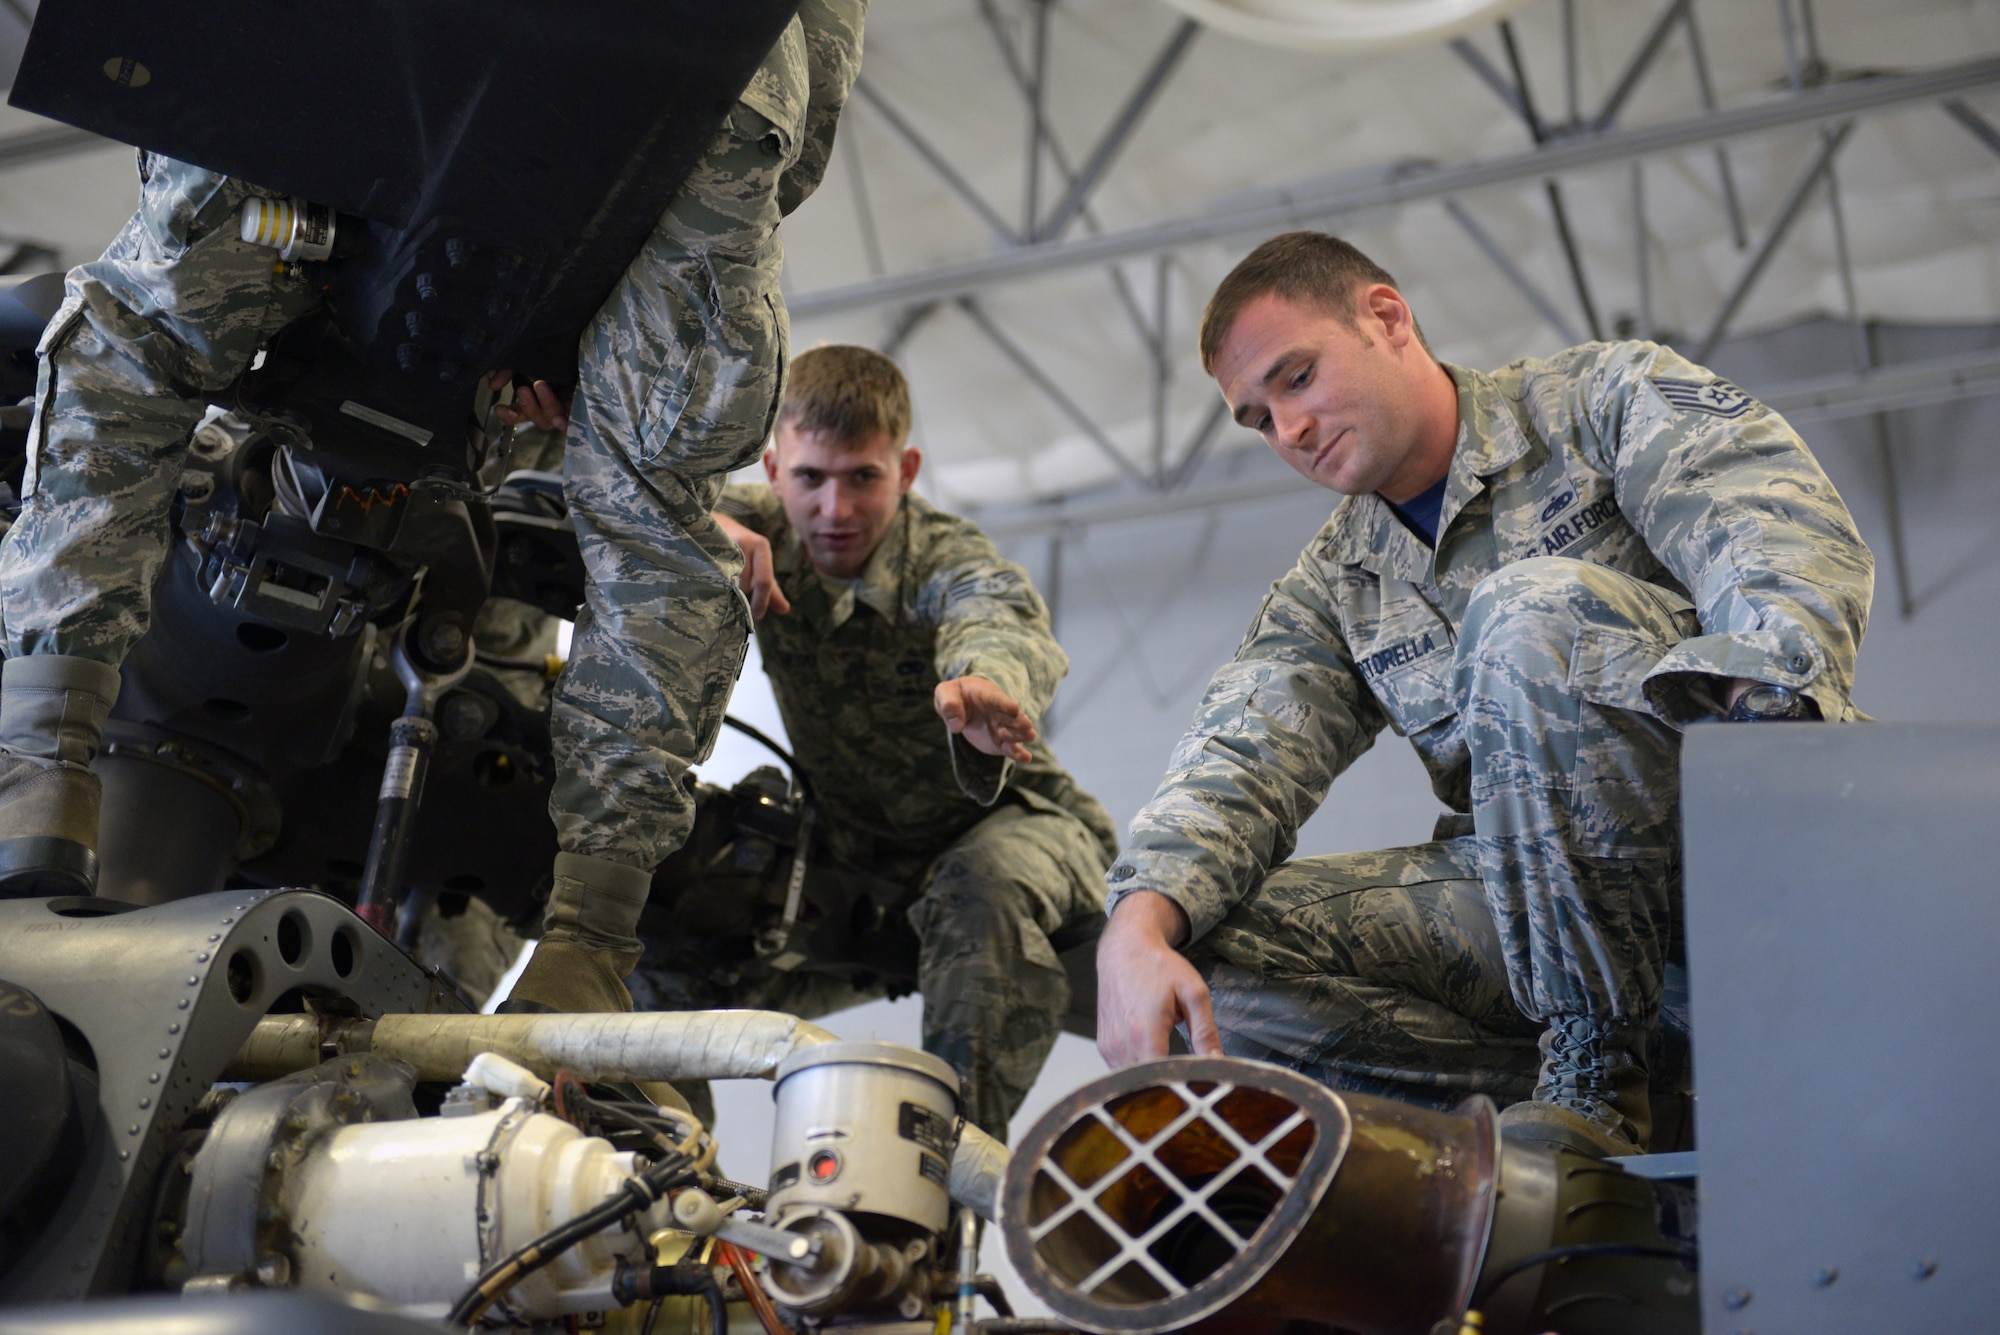 Staff Sgt. Ryan Martorella, Detachment 13, 372nd Training Squadron HH-60G Pave Hawk crew chief instructor, listens to Senior Airman Eric Miesieski, 823rd Maintenance Squadron HH-60 crew chief, during a class at the 823rd MXS hangar on Nellis Air Force Base, Nev., Sept. 19, 2015. Classes at Detachment 13 are a part of upgrade training for incoming and experienced Airmen in aircraft maintenance career fields. (U.S. Air Force photo by Airman 1st Class Rachel Loftis)